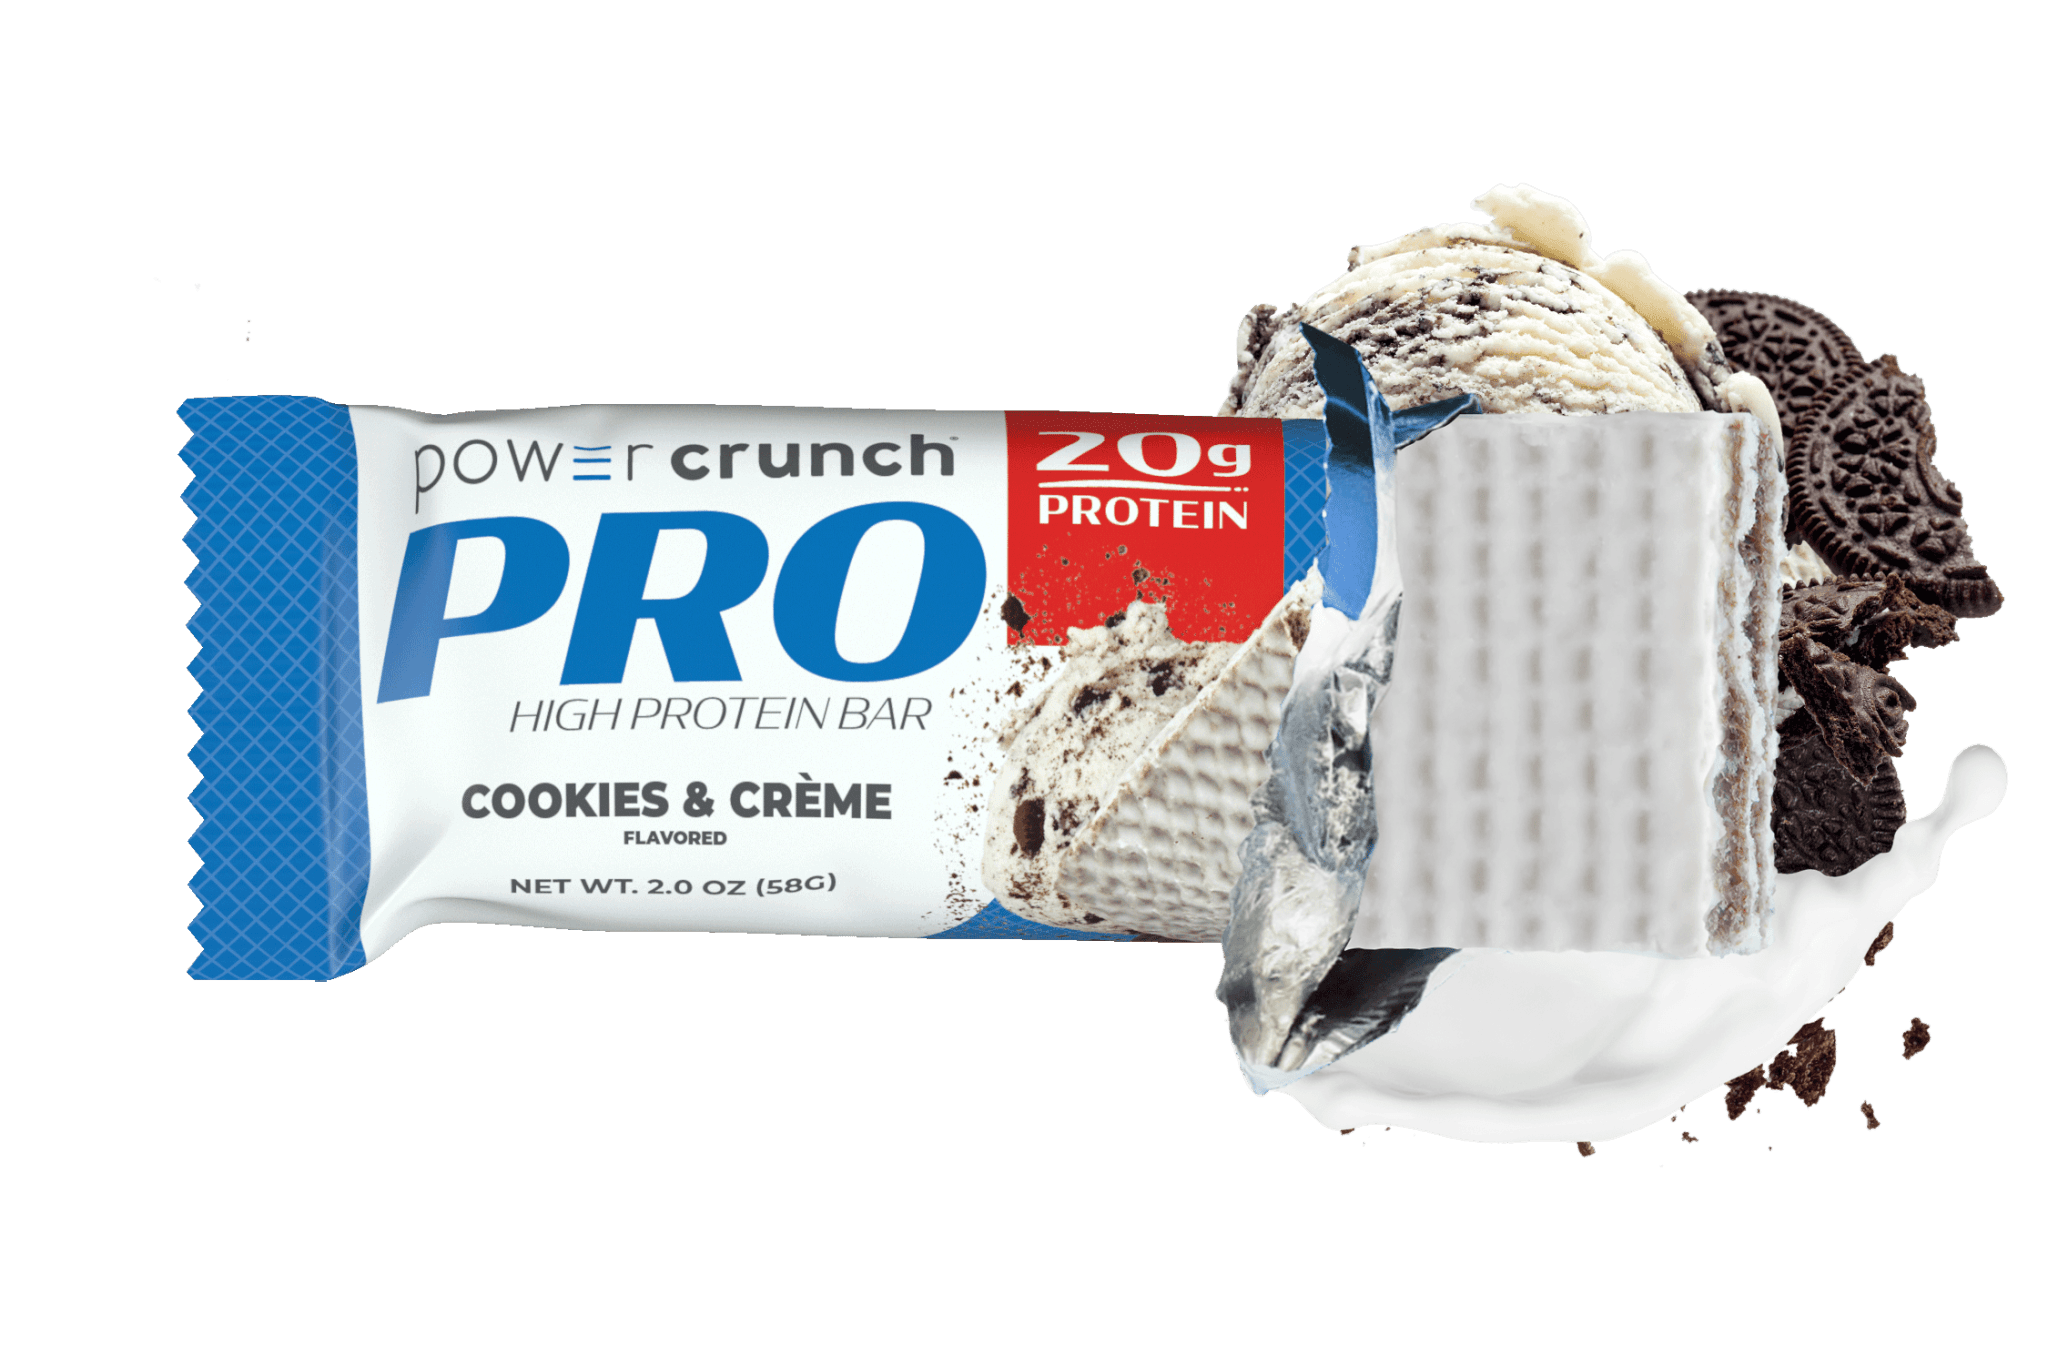 Power Crunch PRO Cookies and Cream 20g protein bars pictured with Cookies and Cream flavor explosion